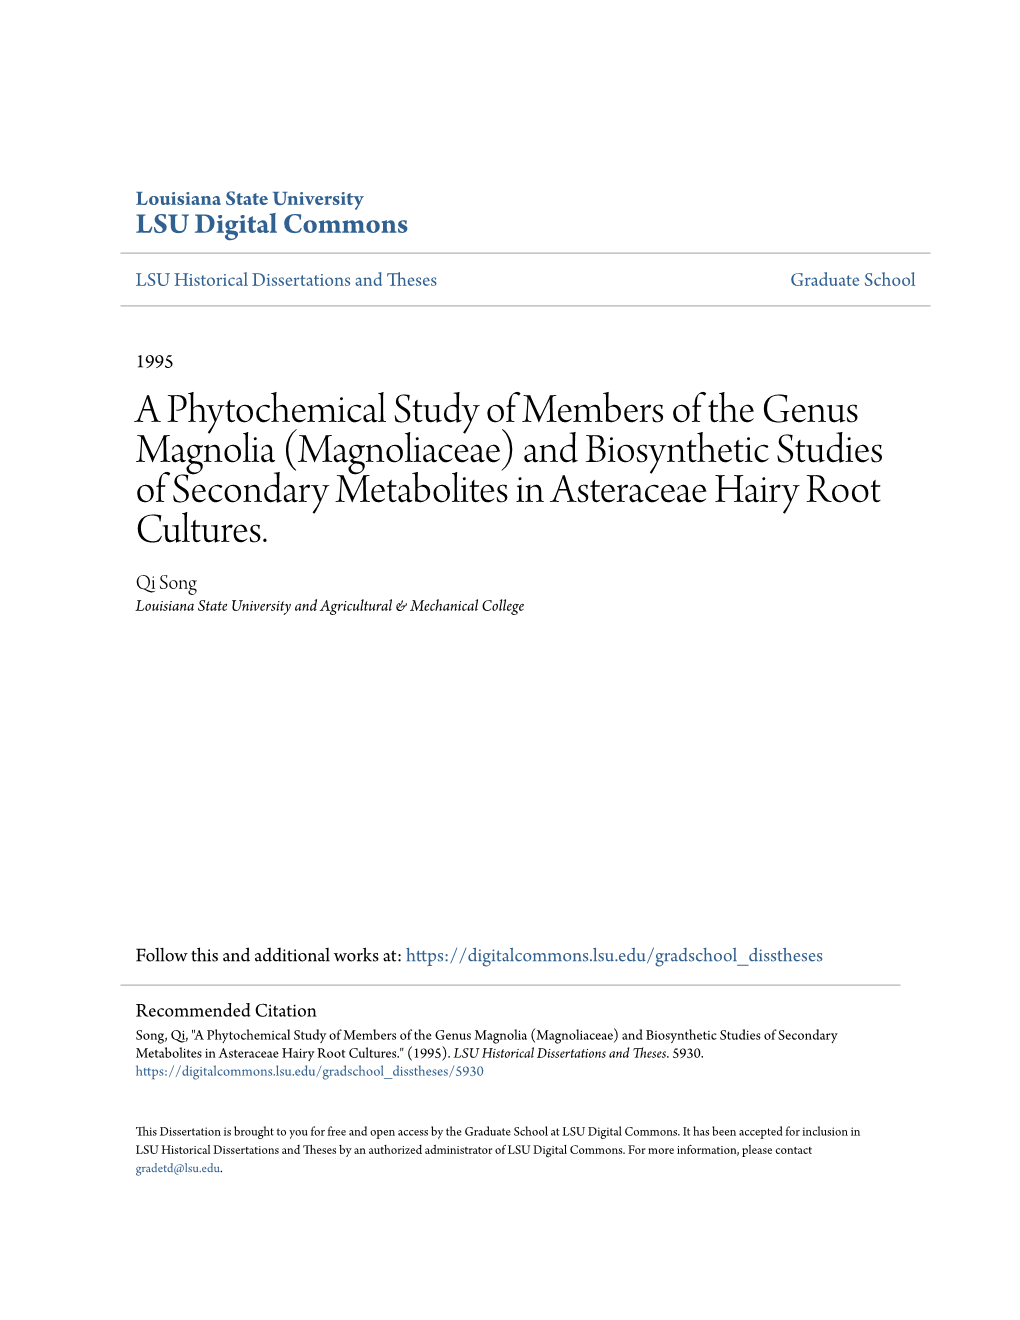 A Phytochemical Study of Members of the Genus Magnolia (Magnoliaceae) and Biosynthetic Studies of Secondary Metabolites in Asteraceae Hairy Root Cultures